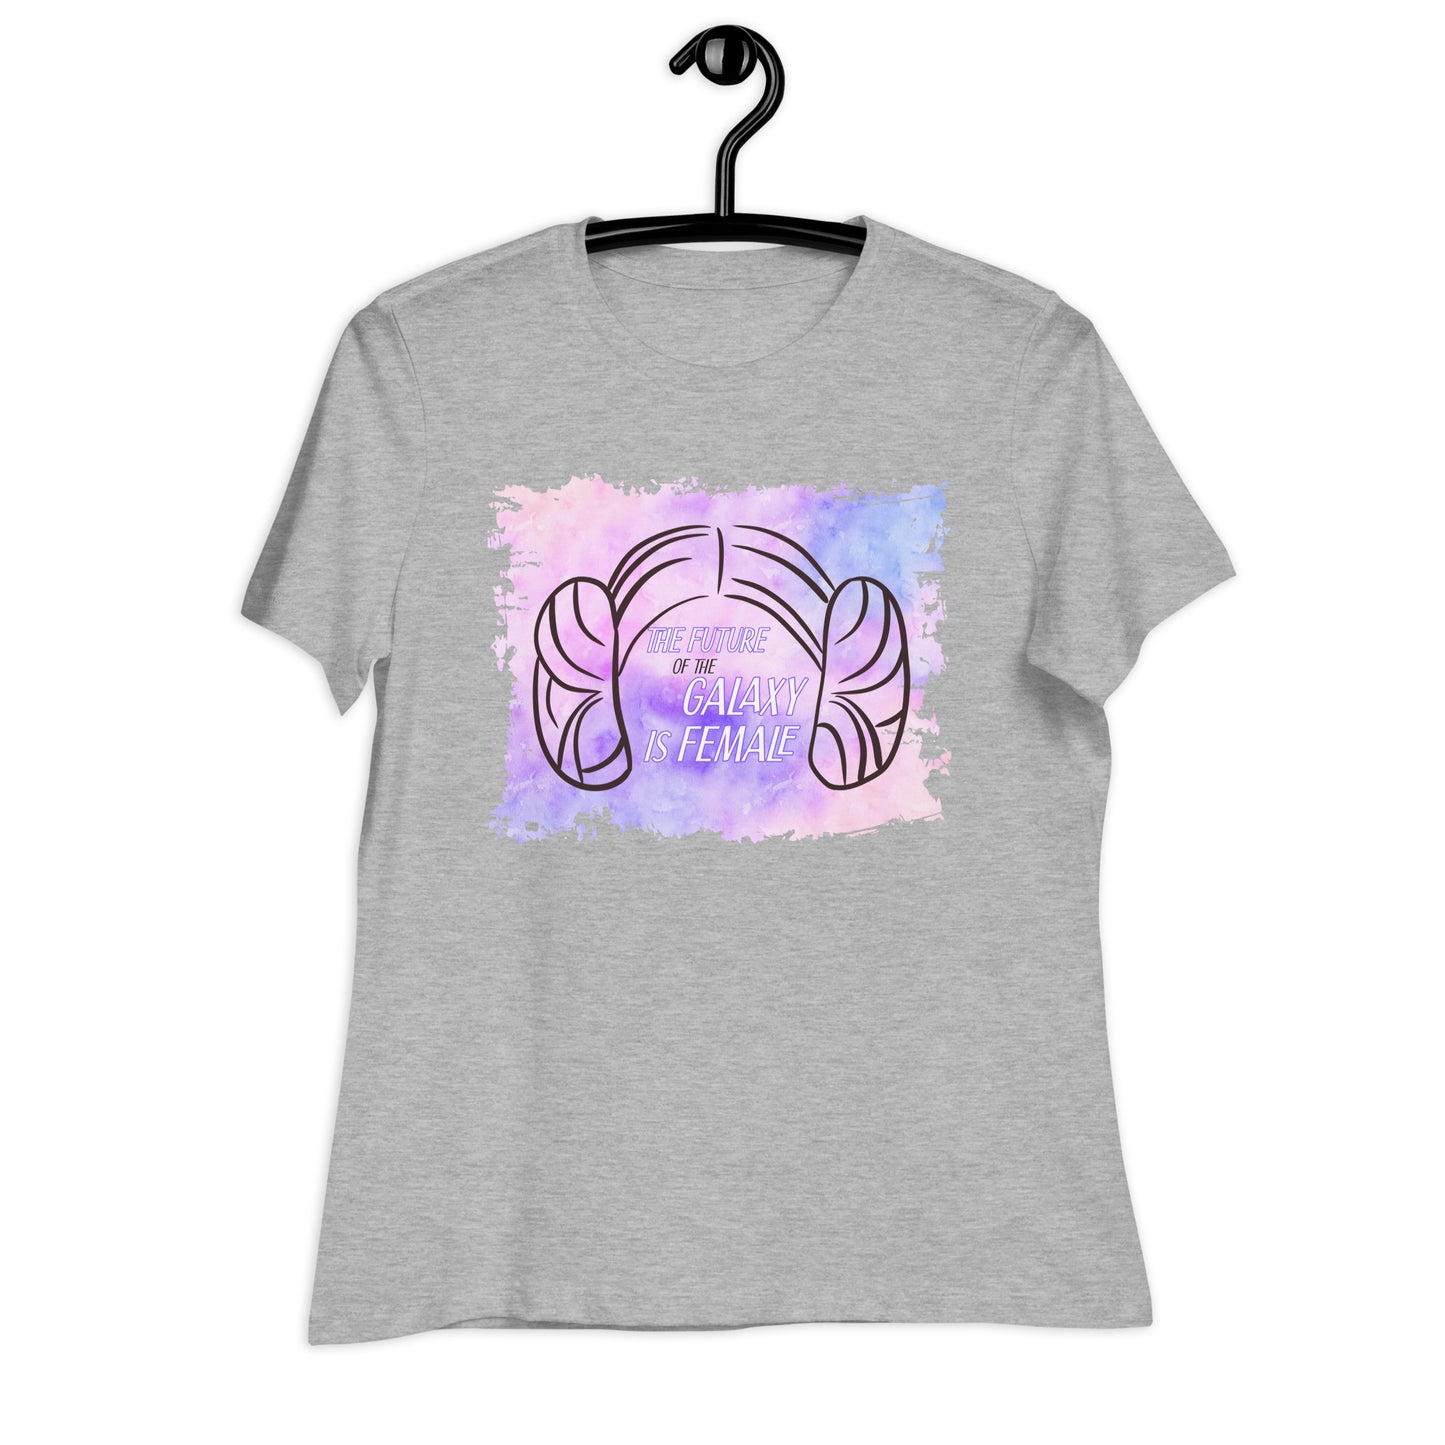 The Future of the Galaxy is Female / Women's Relaxed T-Shirt